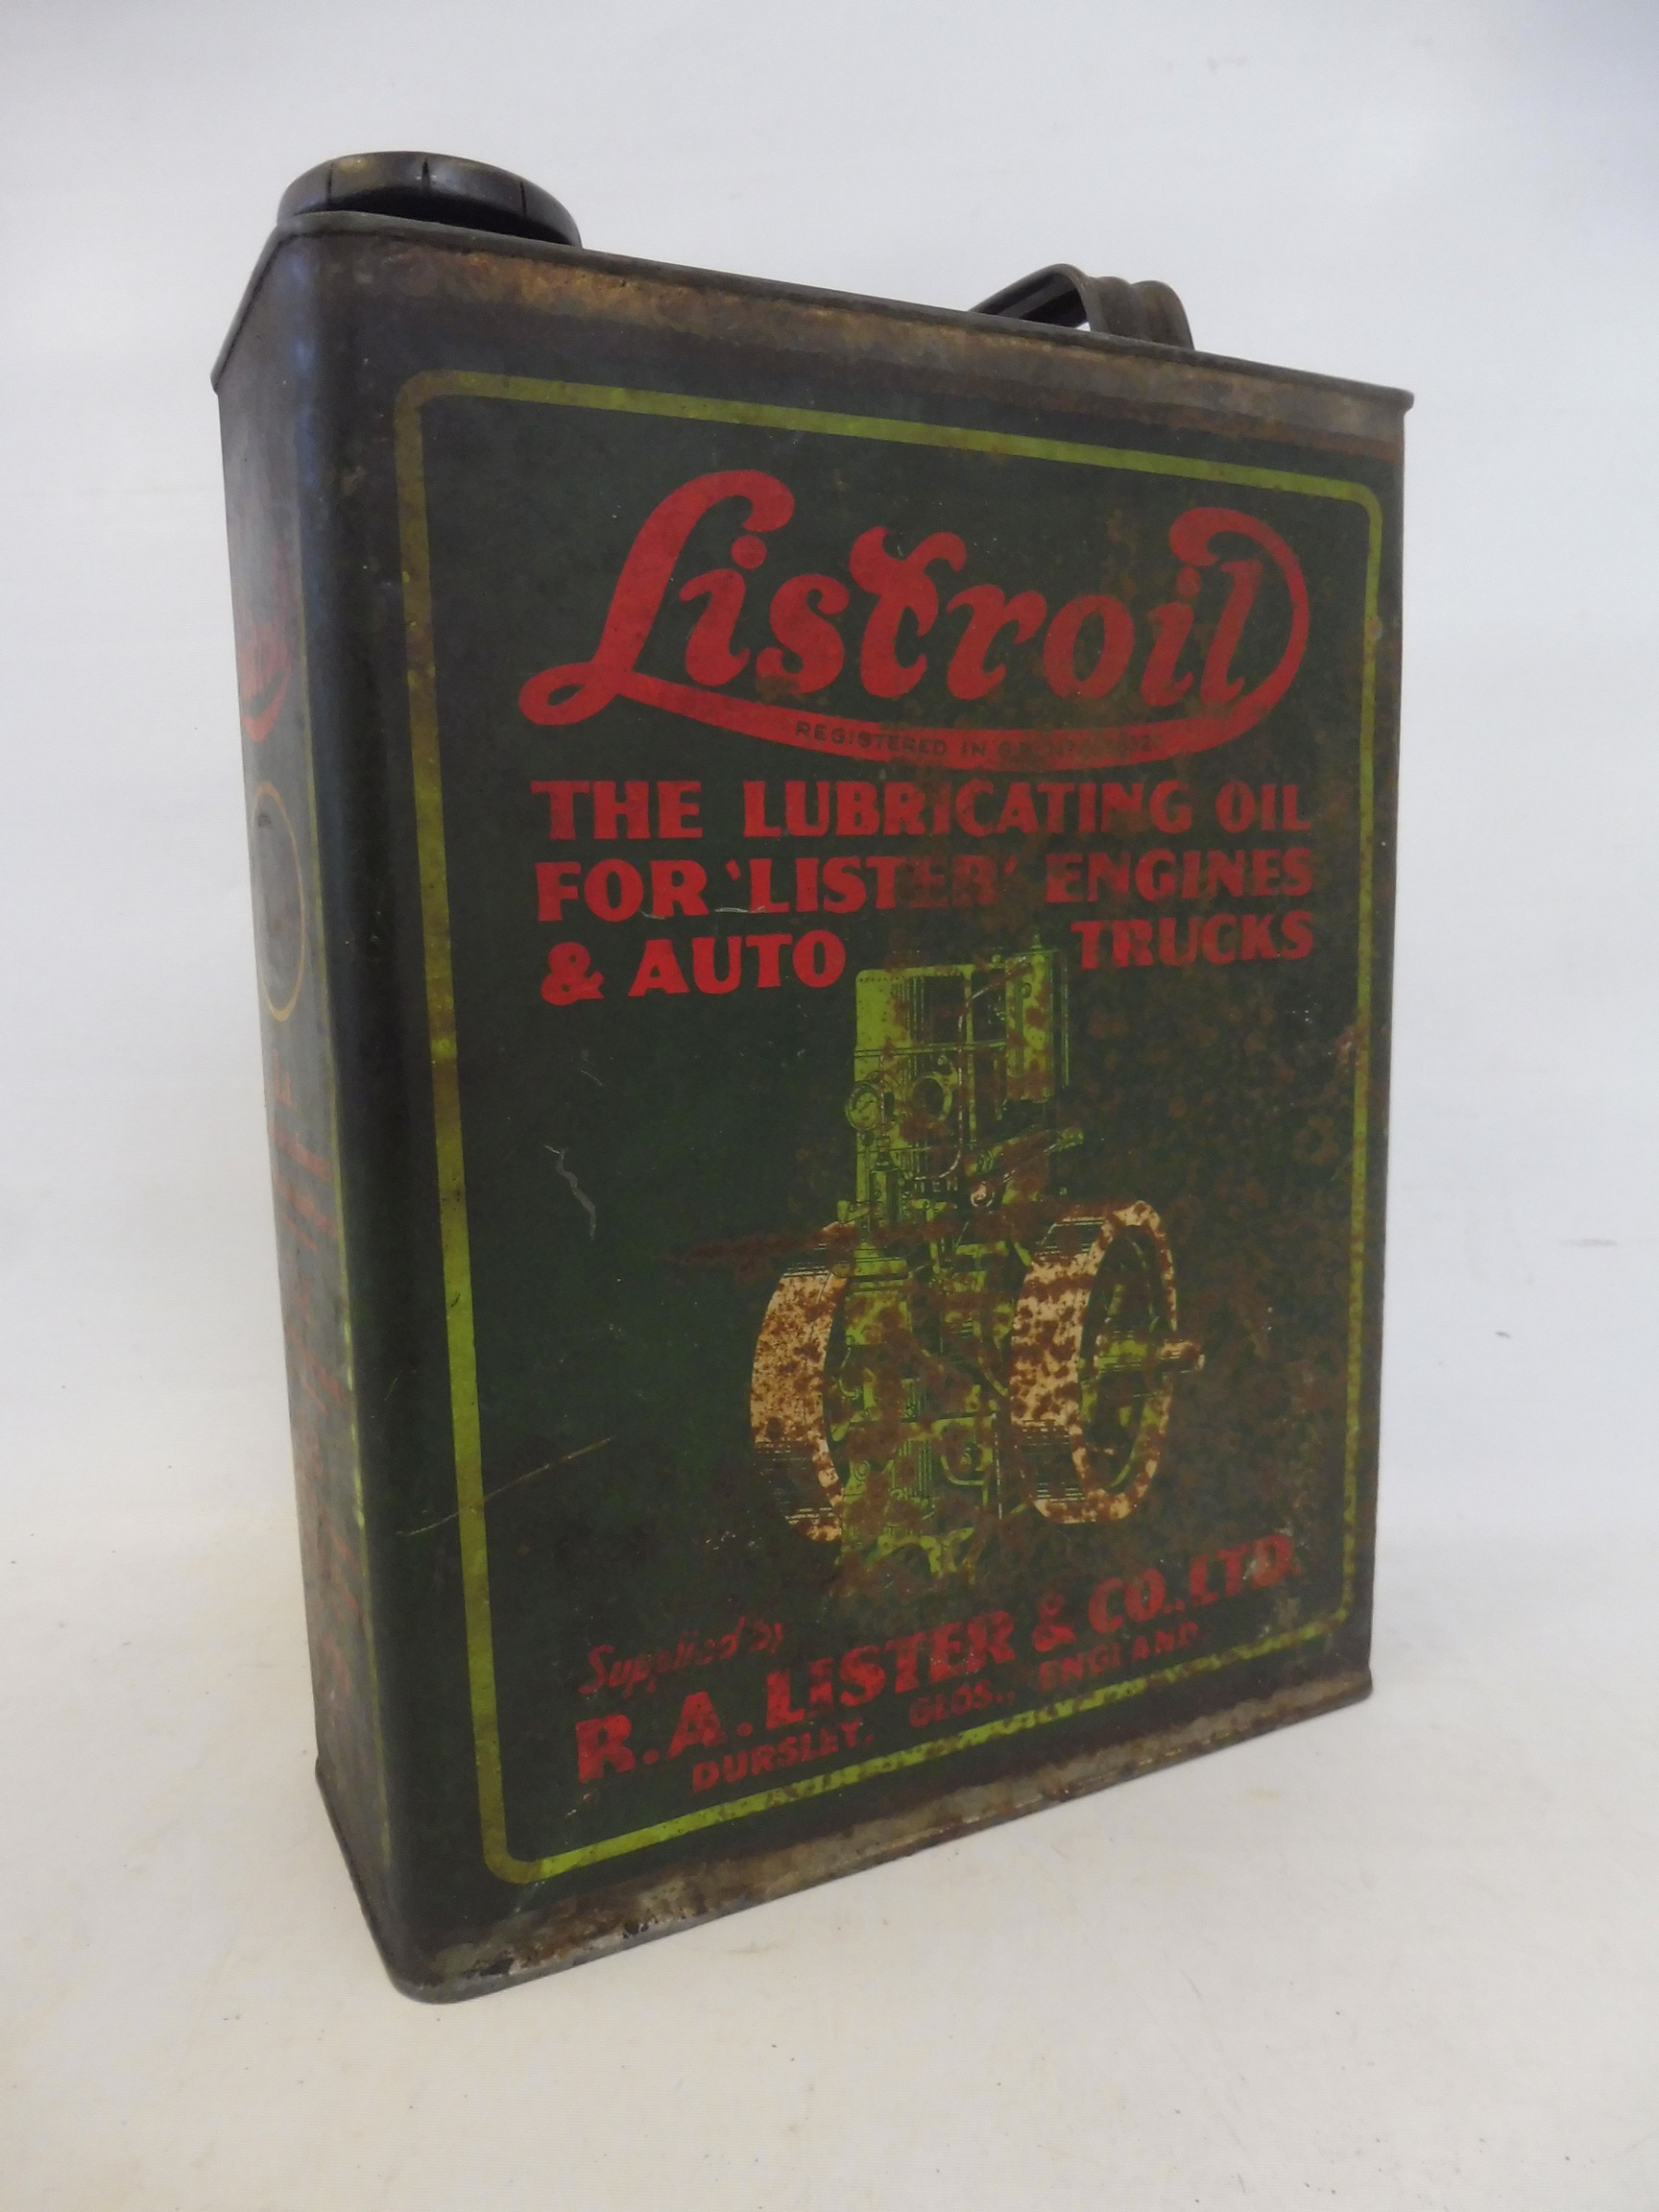 A Listroil Lubricating Oil gallon can with an image of a stationary engine to both sides.